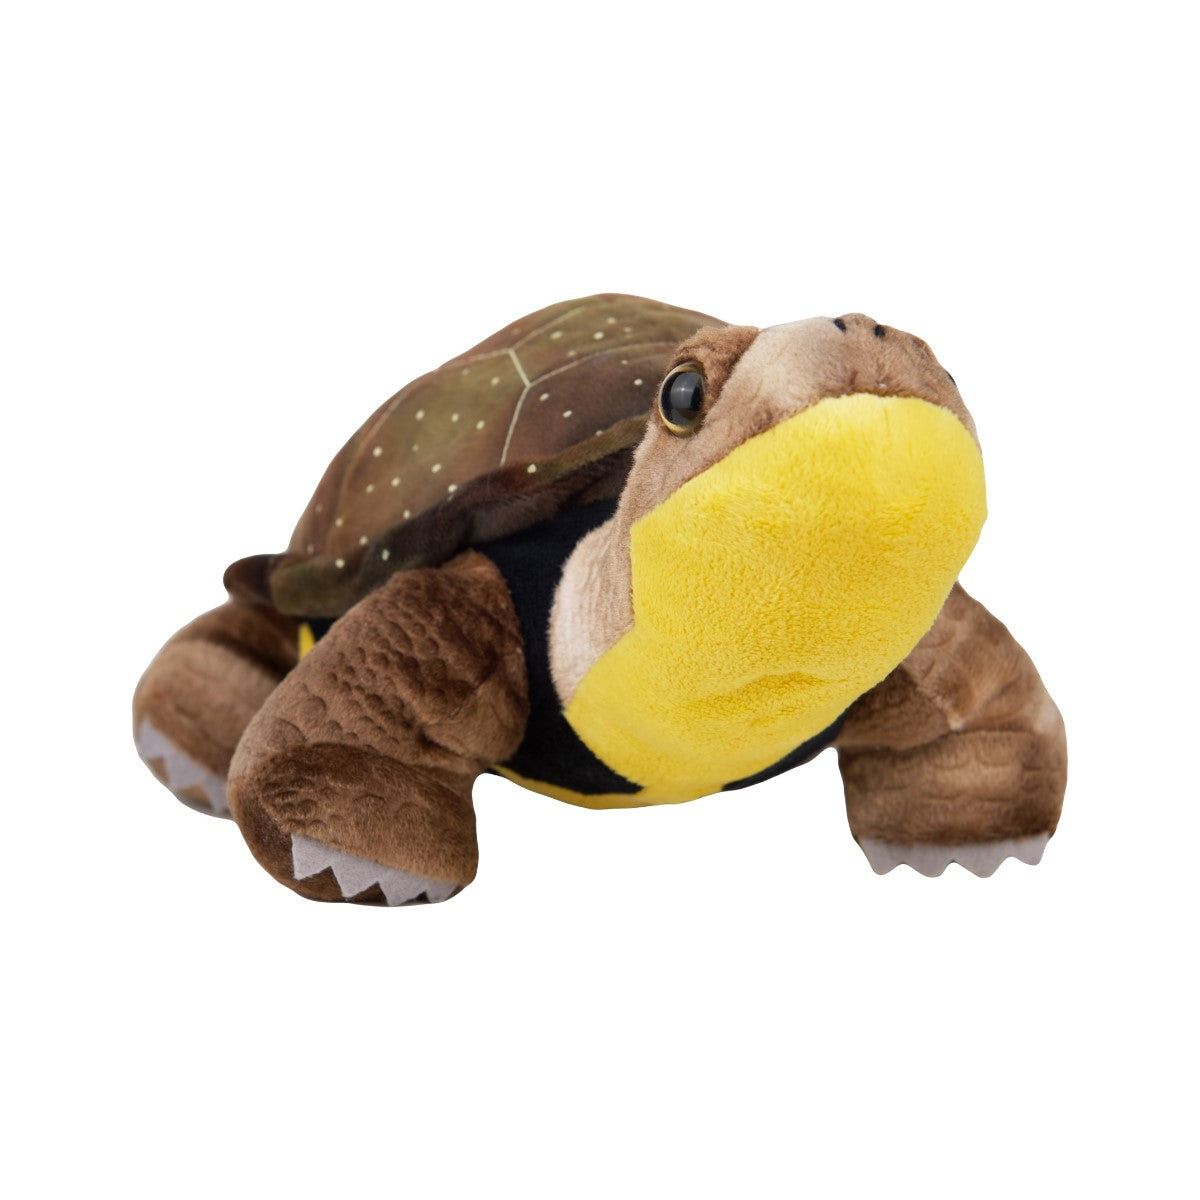 Blanding's Turtle Plush stuffed animal, with yellow underside and brown shell. 